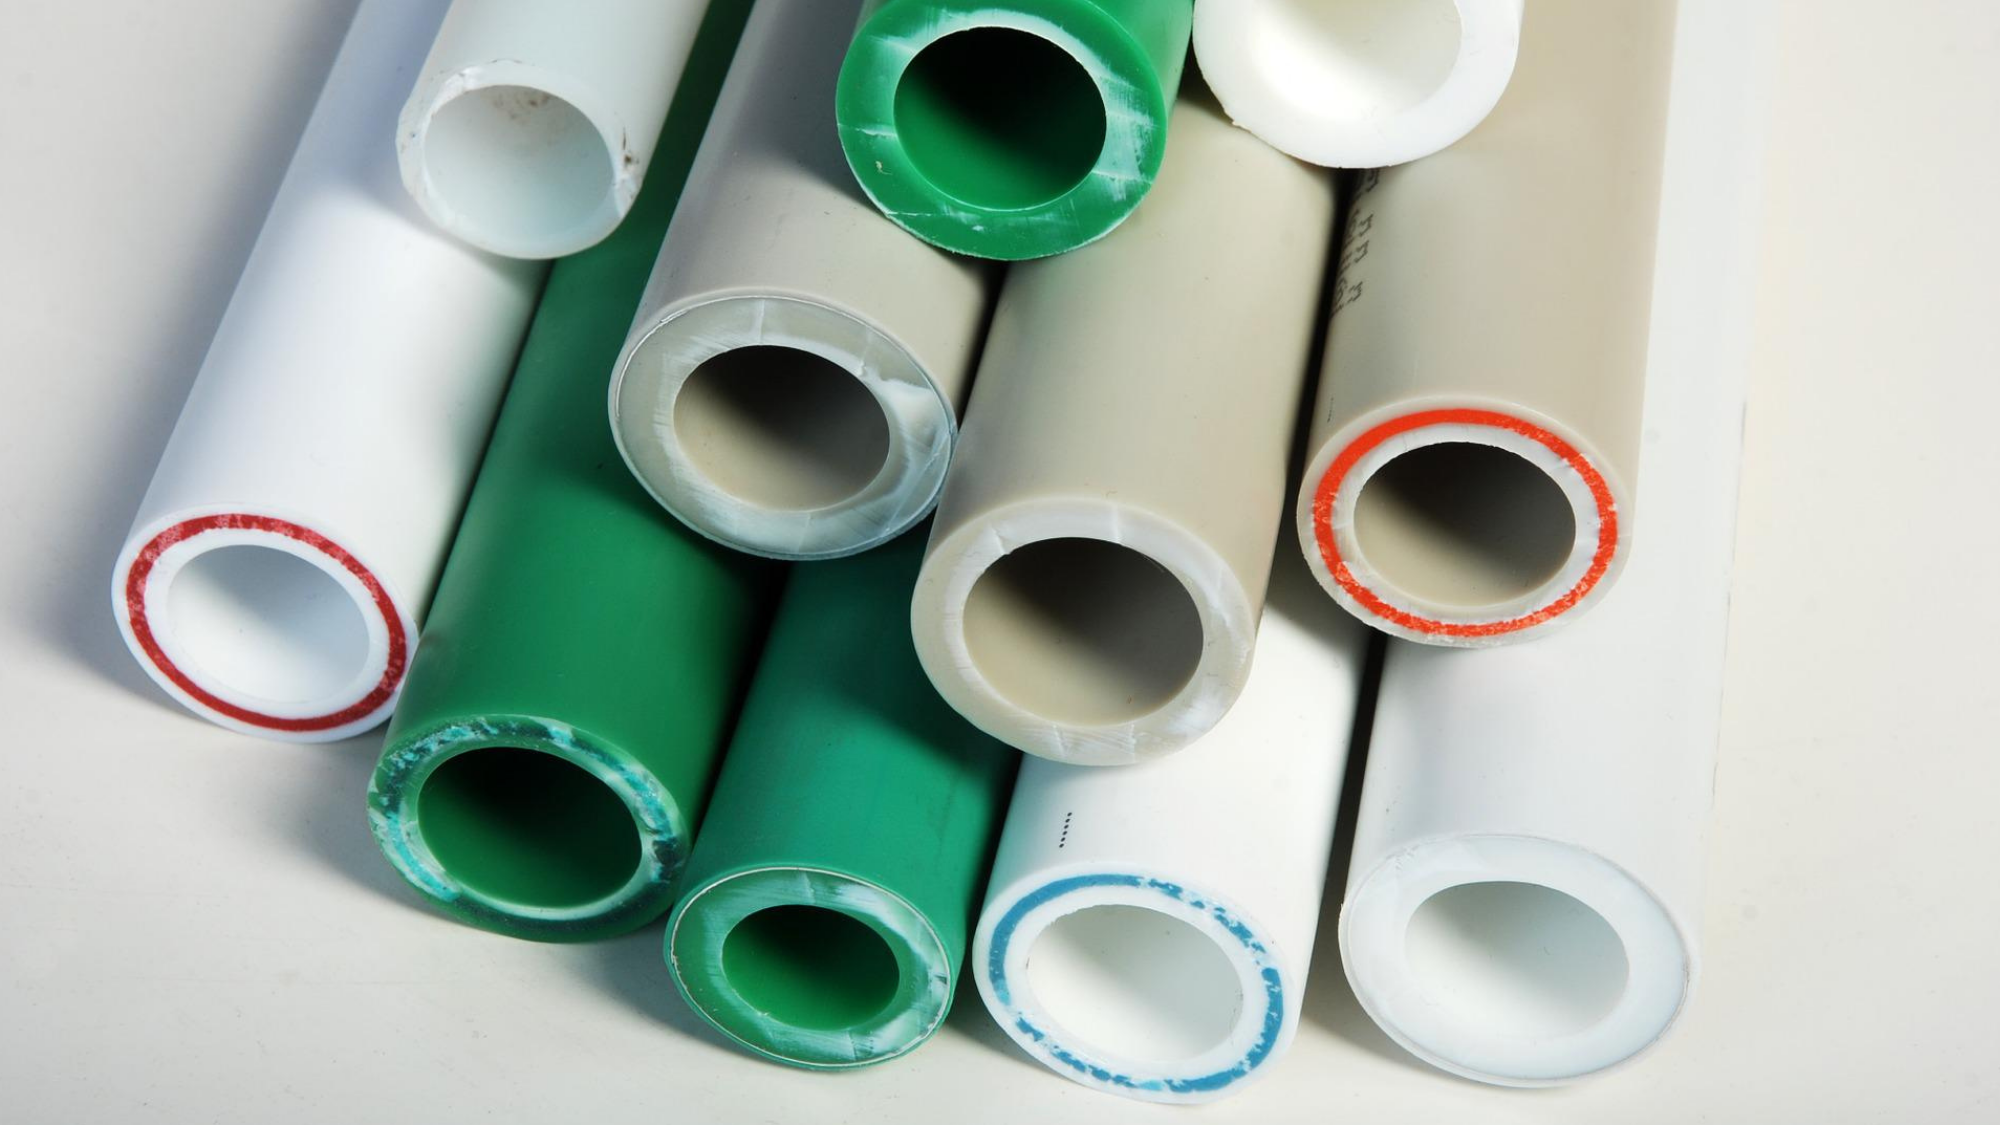 Condale plastics pipes of varying colours